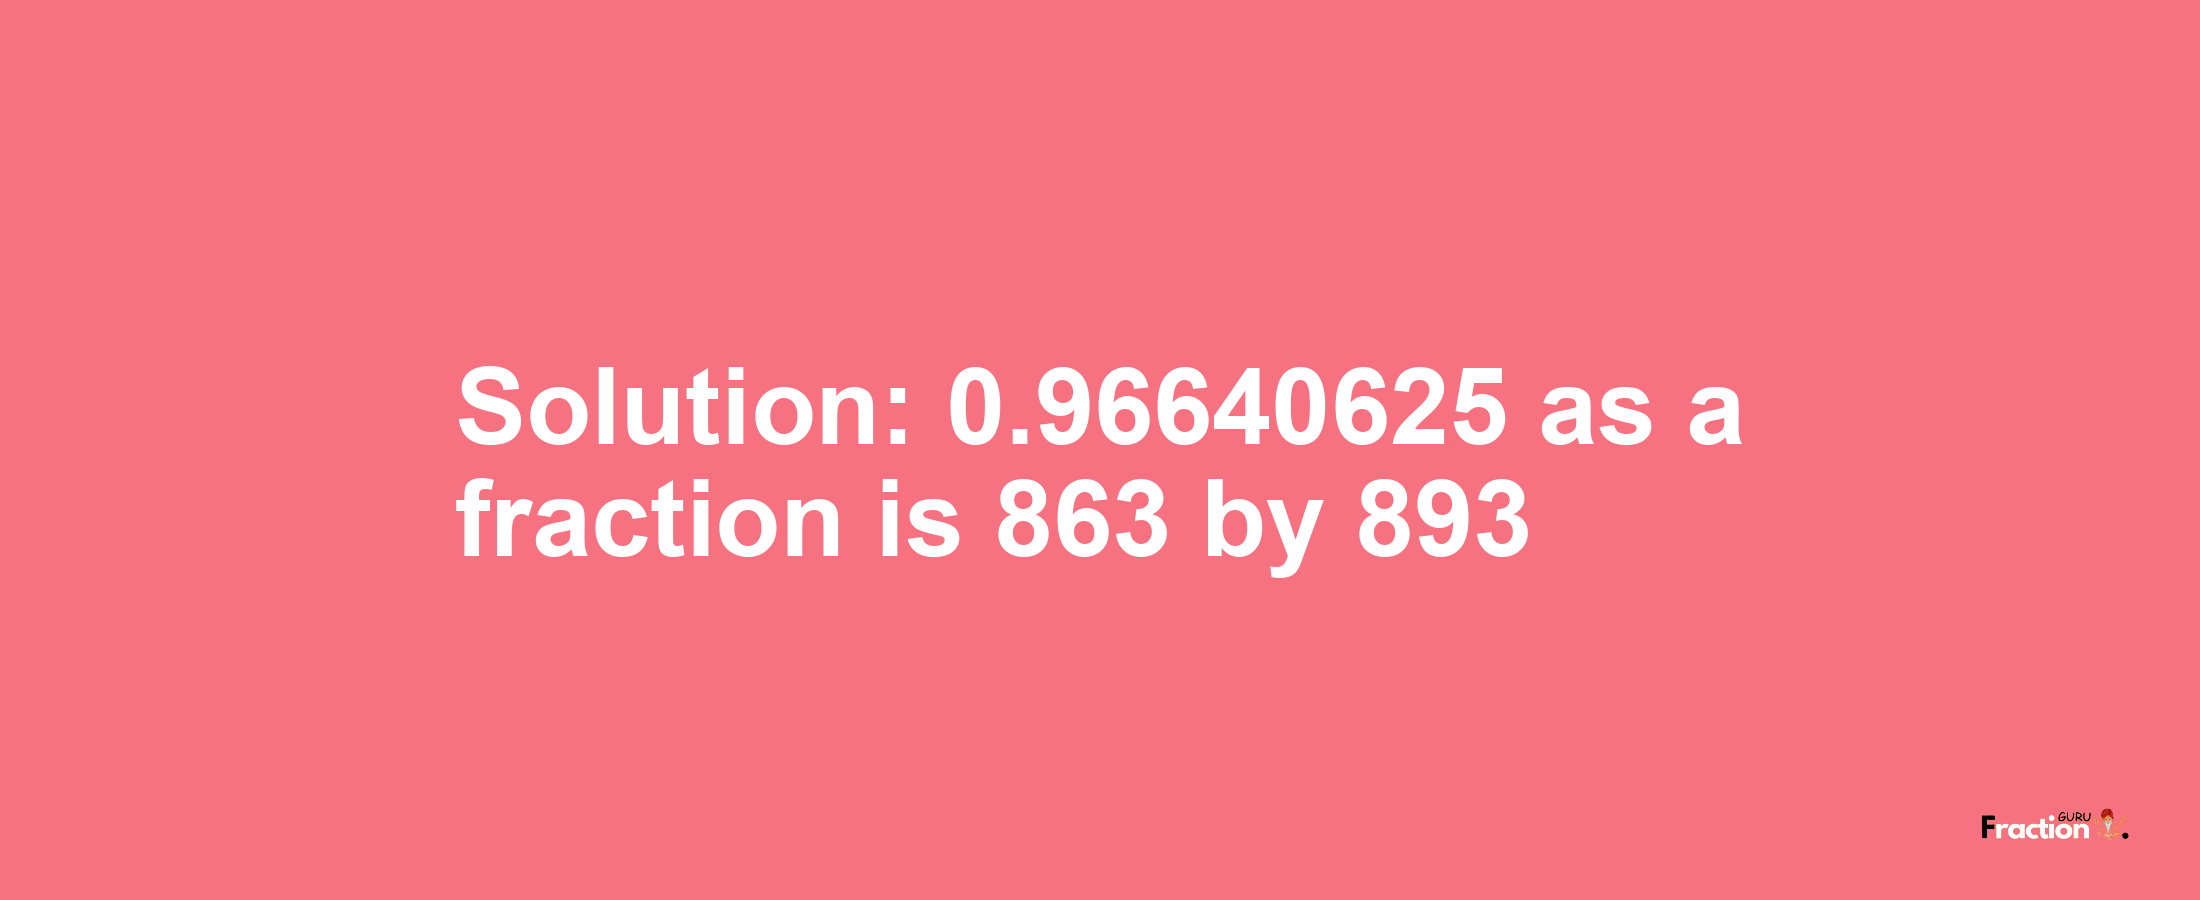 Solution:0.96640625 as a fraction is 863/893